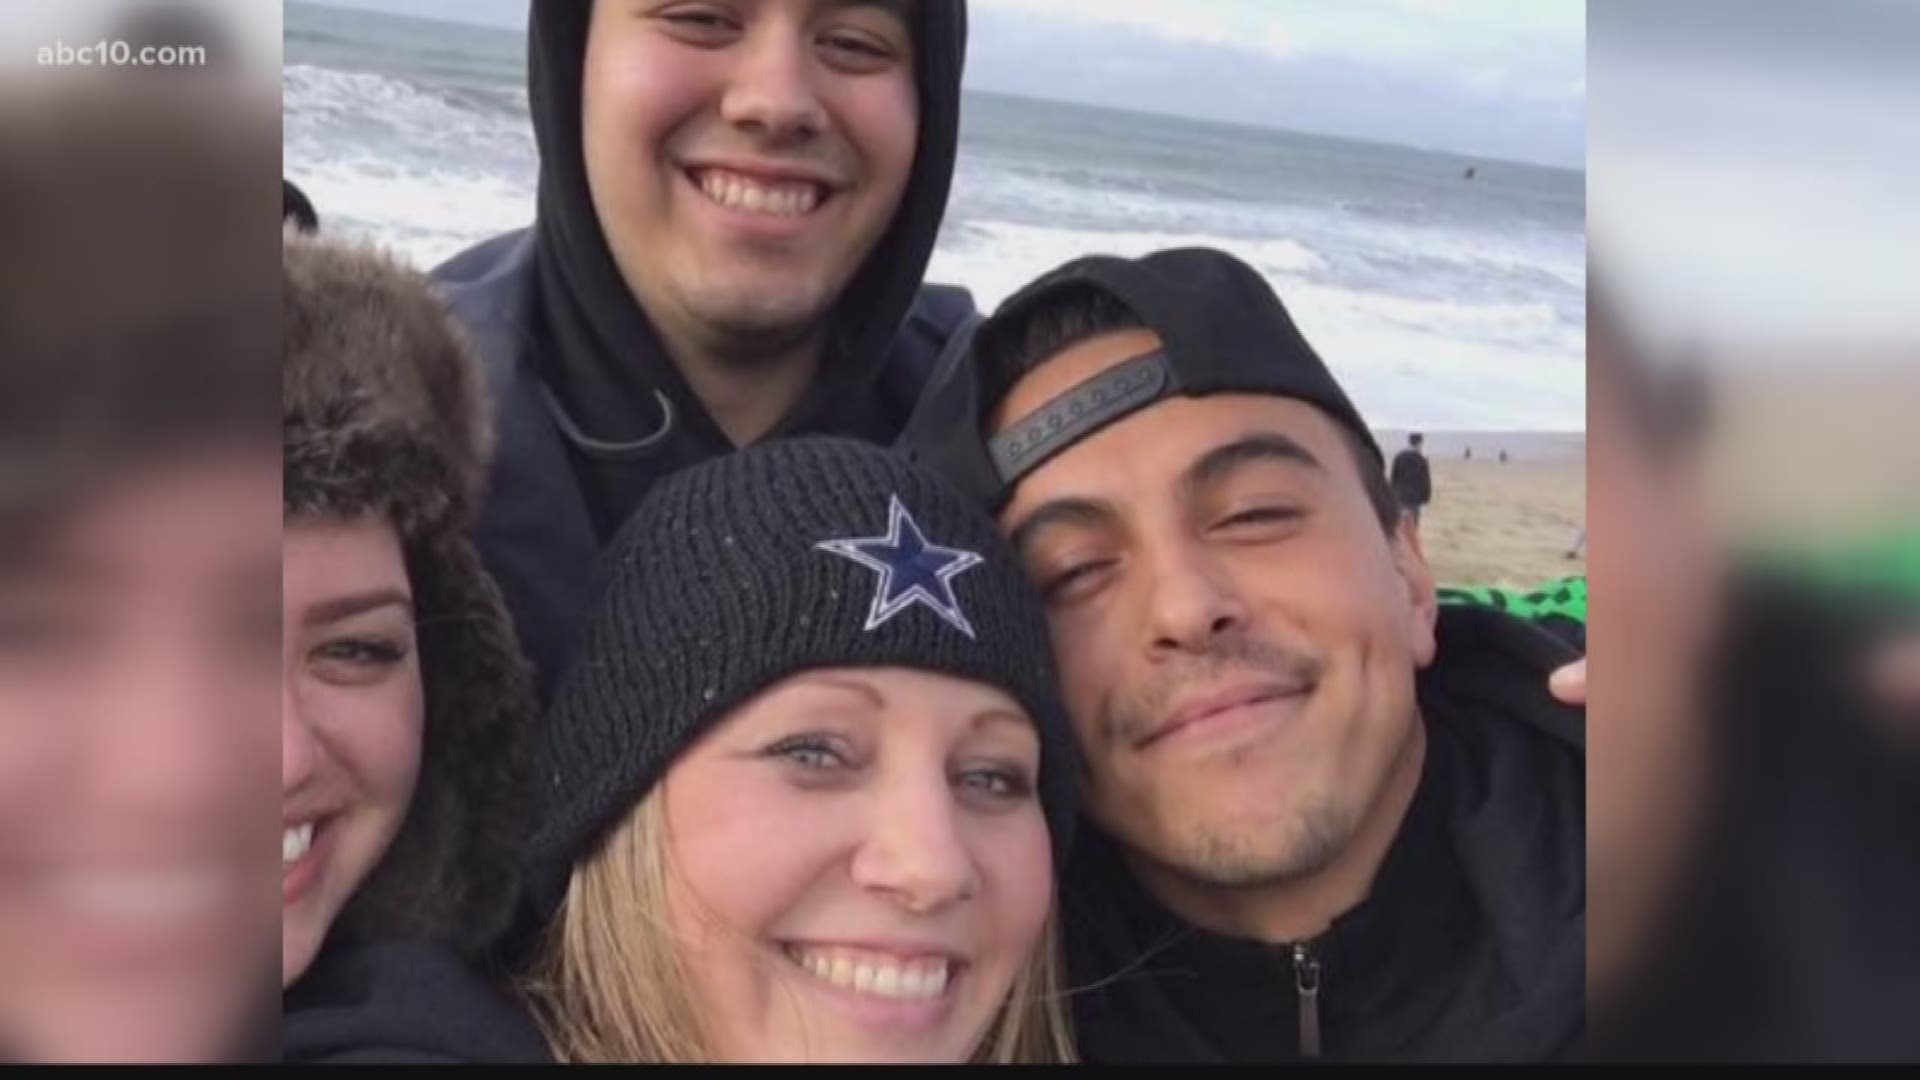 Family, friends and co-workers are mourning the loss of Antonio Navarrete -- a young, bartender at the popular Sacramento restaurant Zocalo -- who was killed by a drunk driver early Saturday morning.